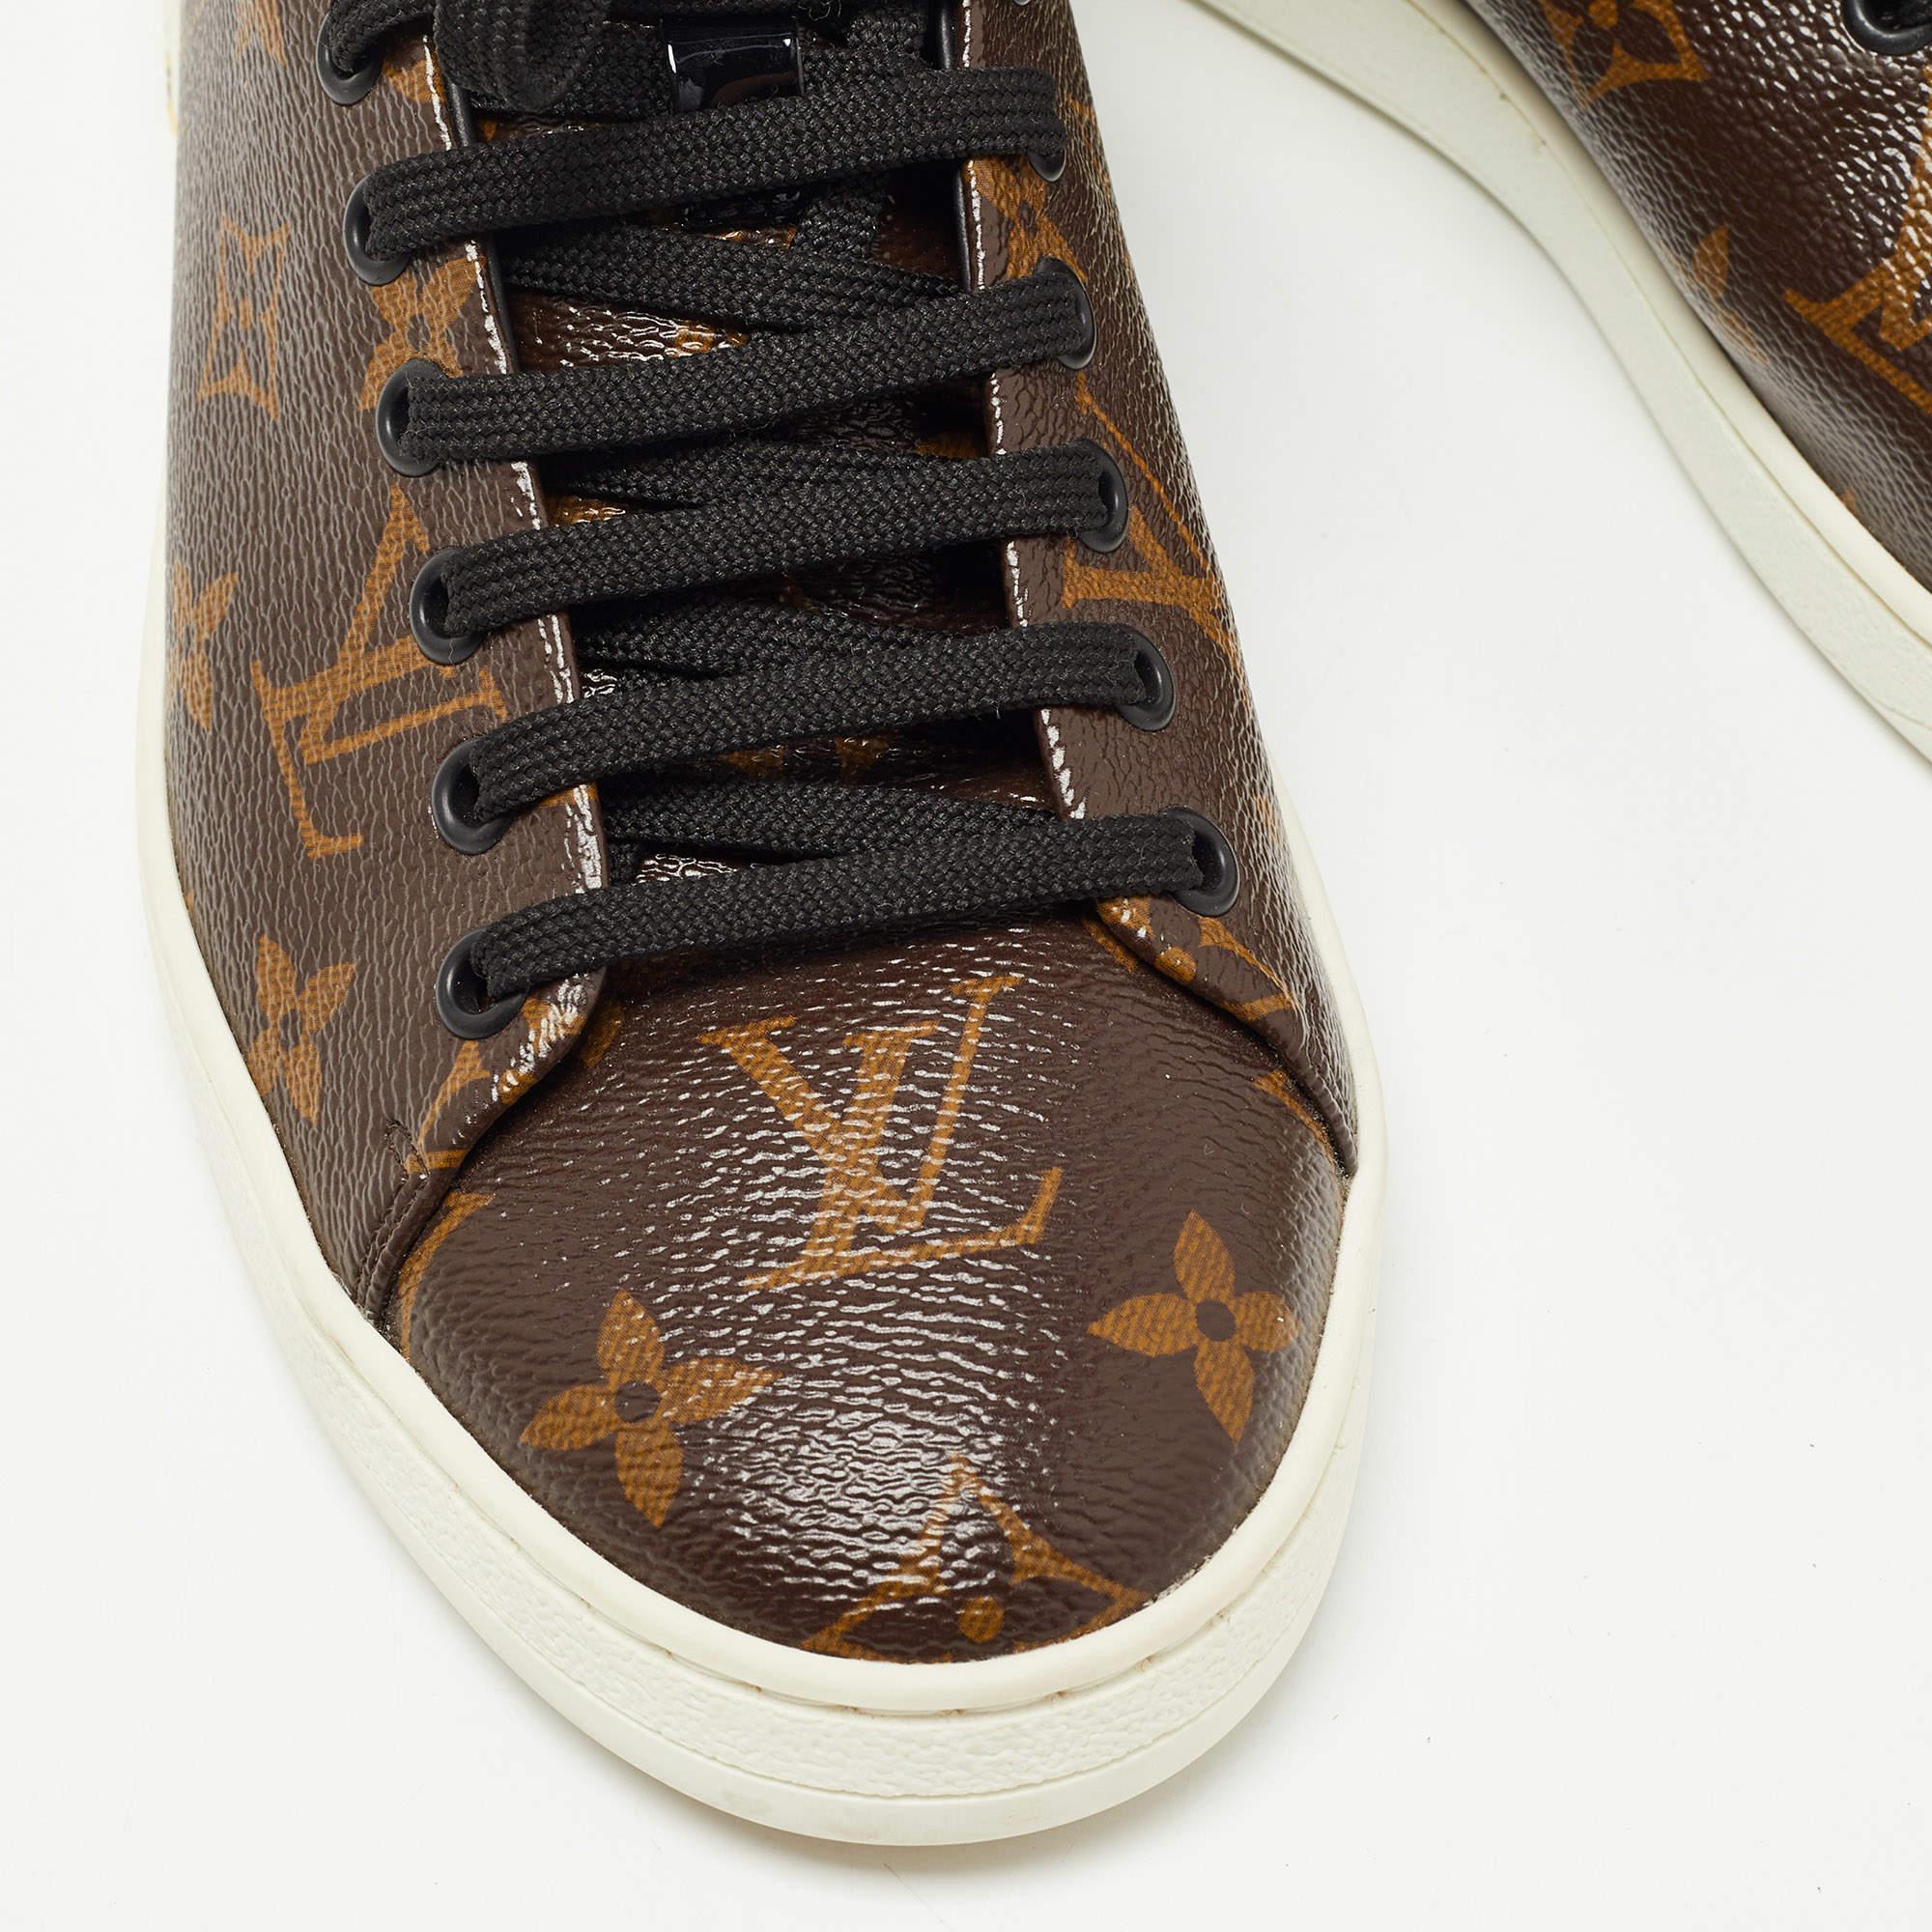 Louis Vuitton Monogram Canvas and Patent Leather Frontrow Sneakers Size 38.5 2